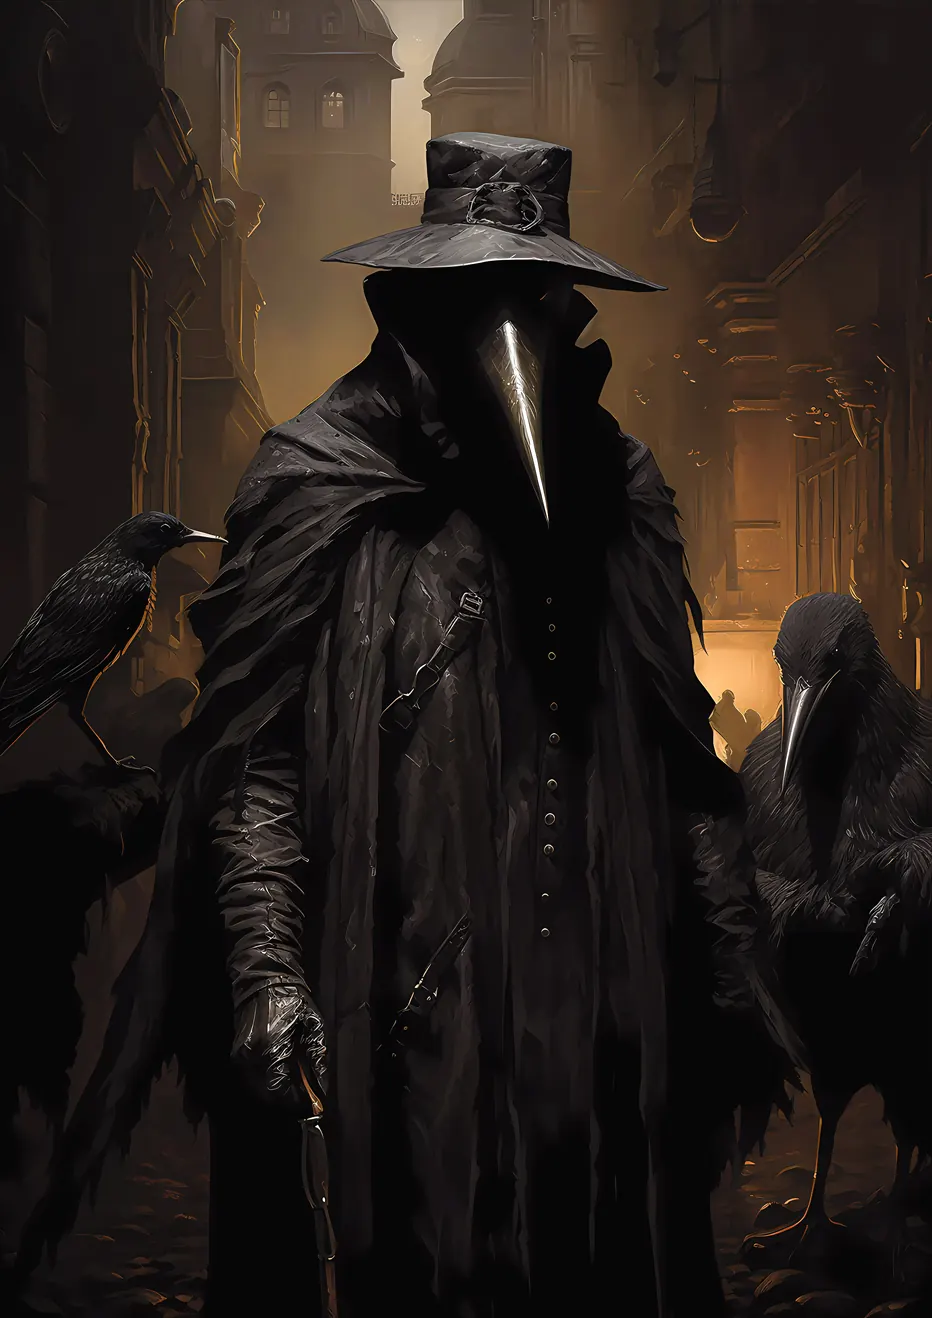 A mysterious figure cloaked in black attire stands amidst a dystopian cityscape, surrounded by crow-like creatures, in the artwork titled "Doomed Dystopia."